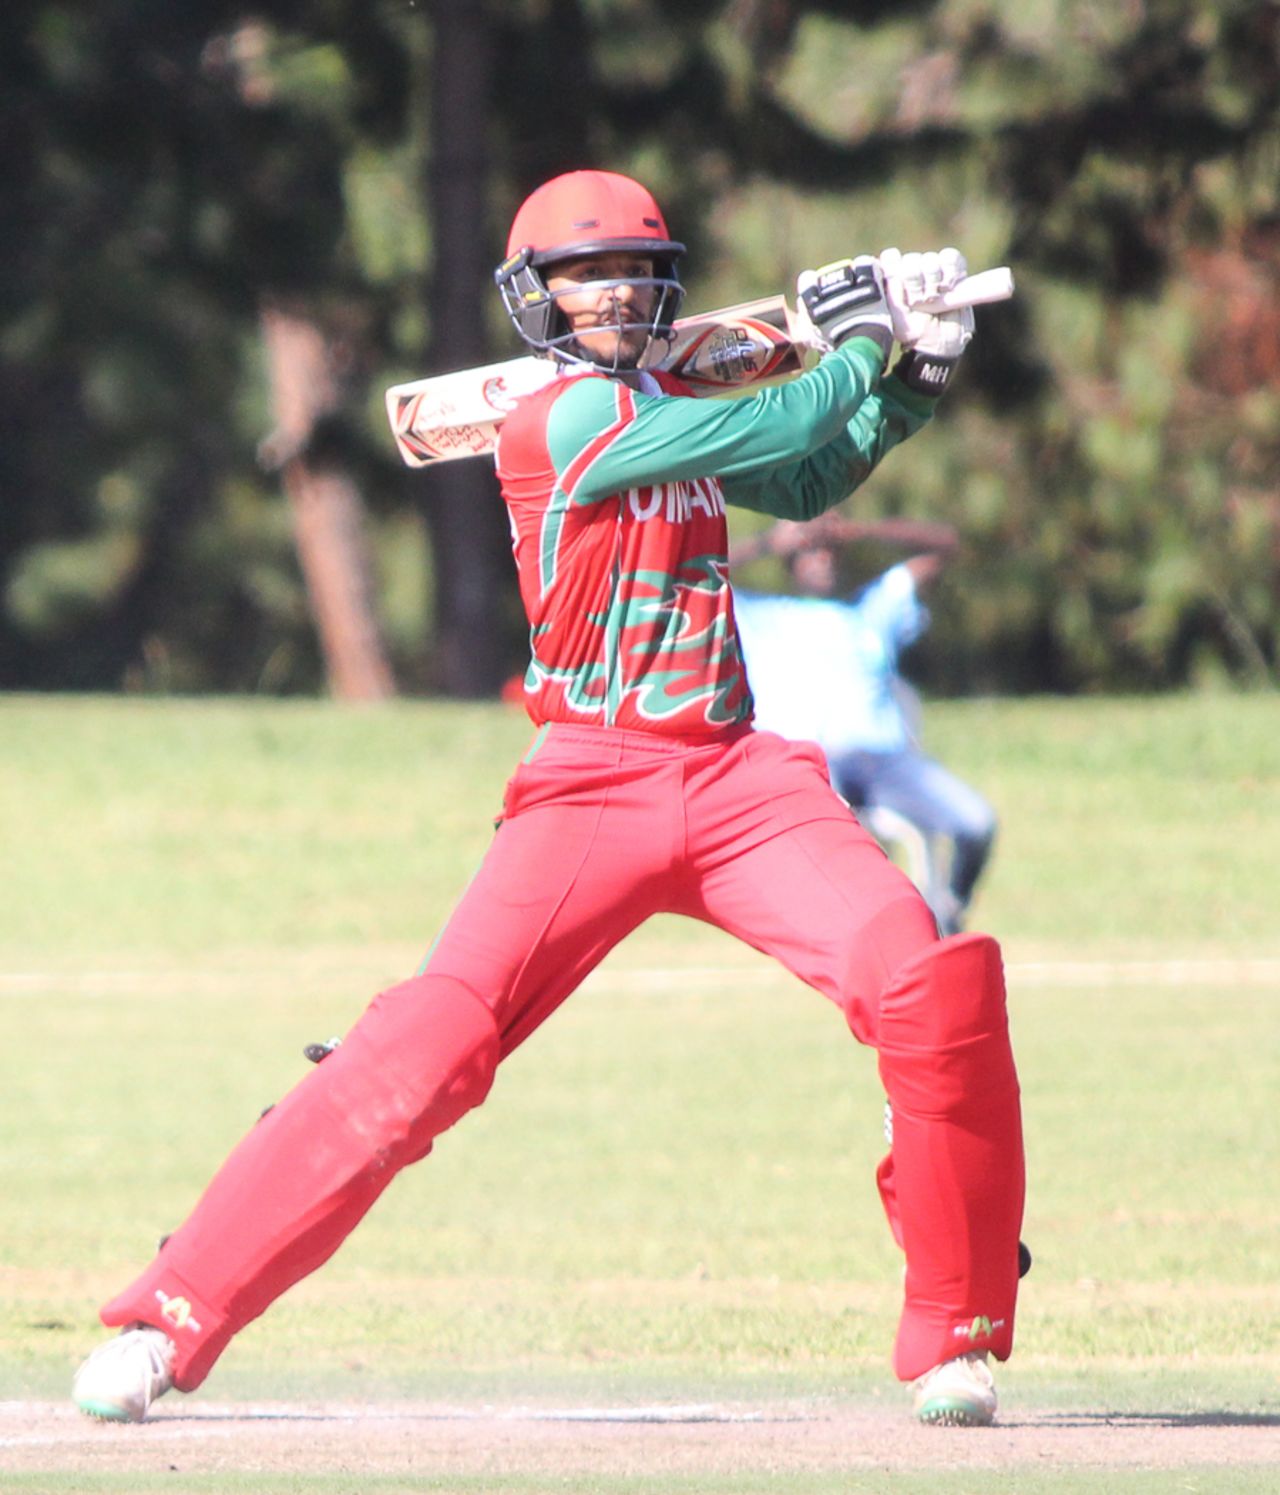 Aqib Ilyas drives over cover for one of his eight fours, Oman v USA, ICC World Cricket League Division Three, Entebbe, May 23, 2017